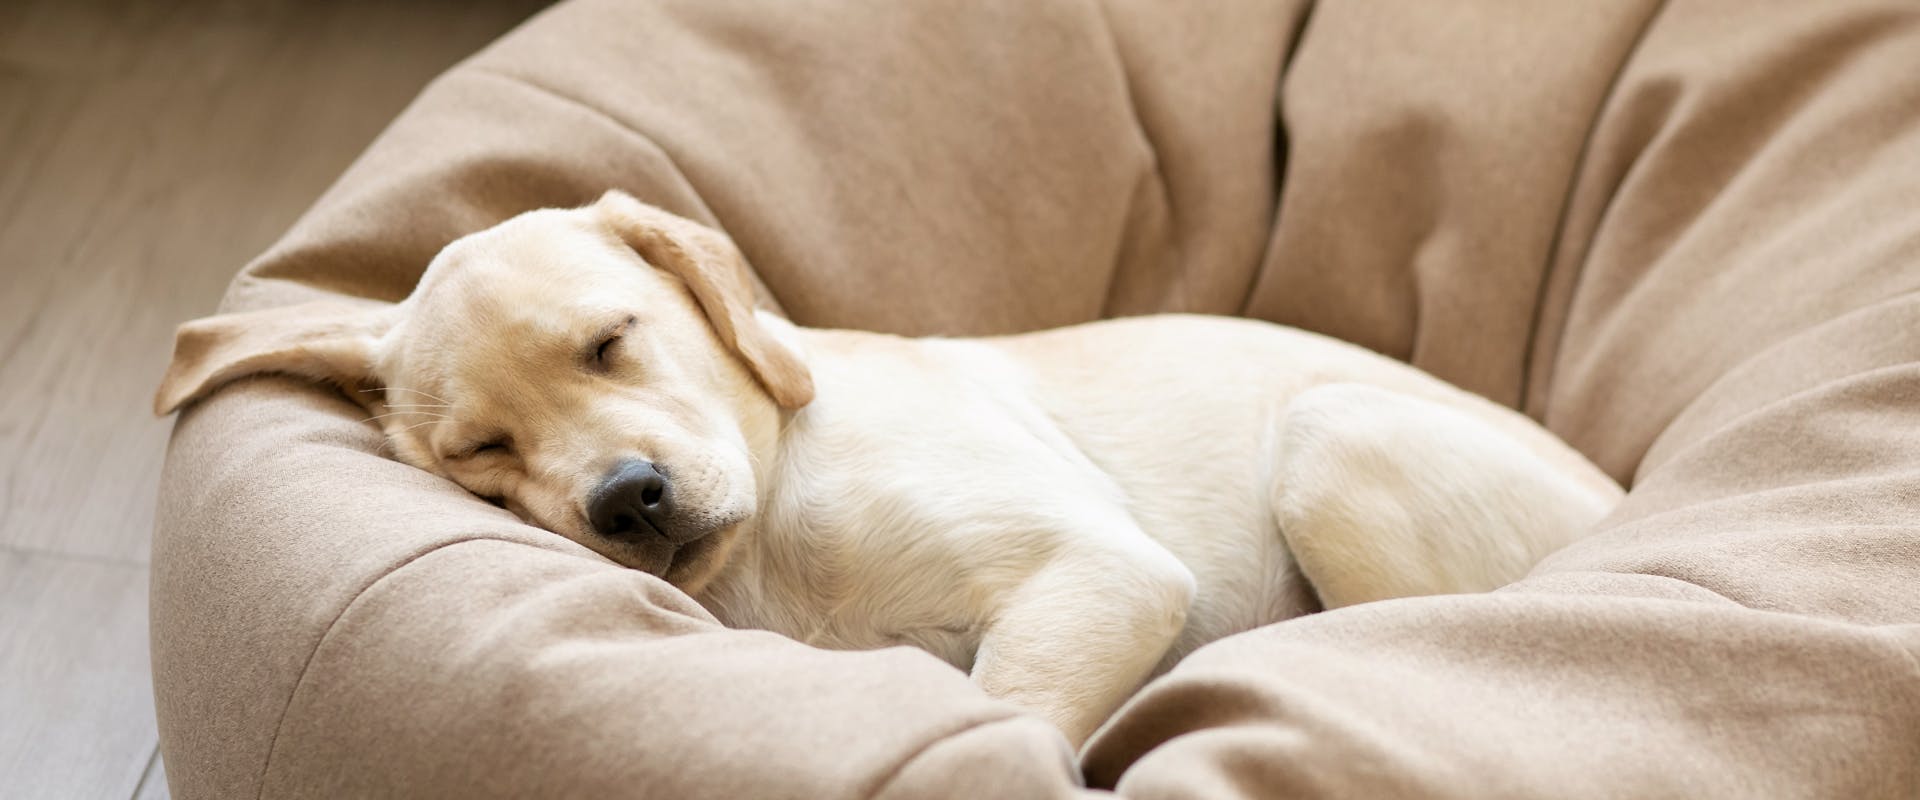 A puppy sleeps in a cozy bed.